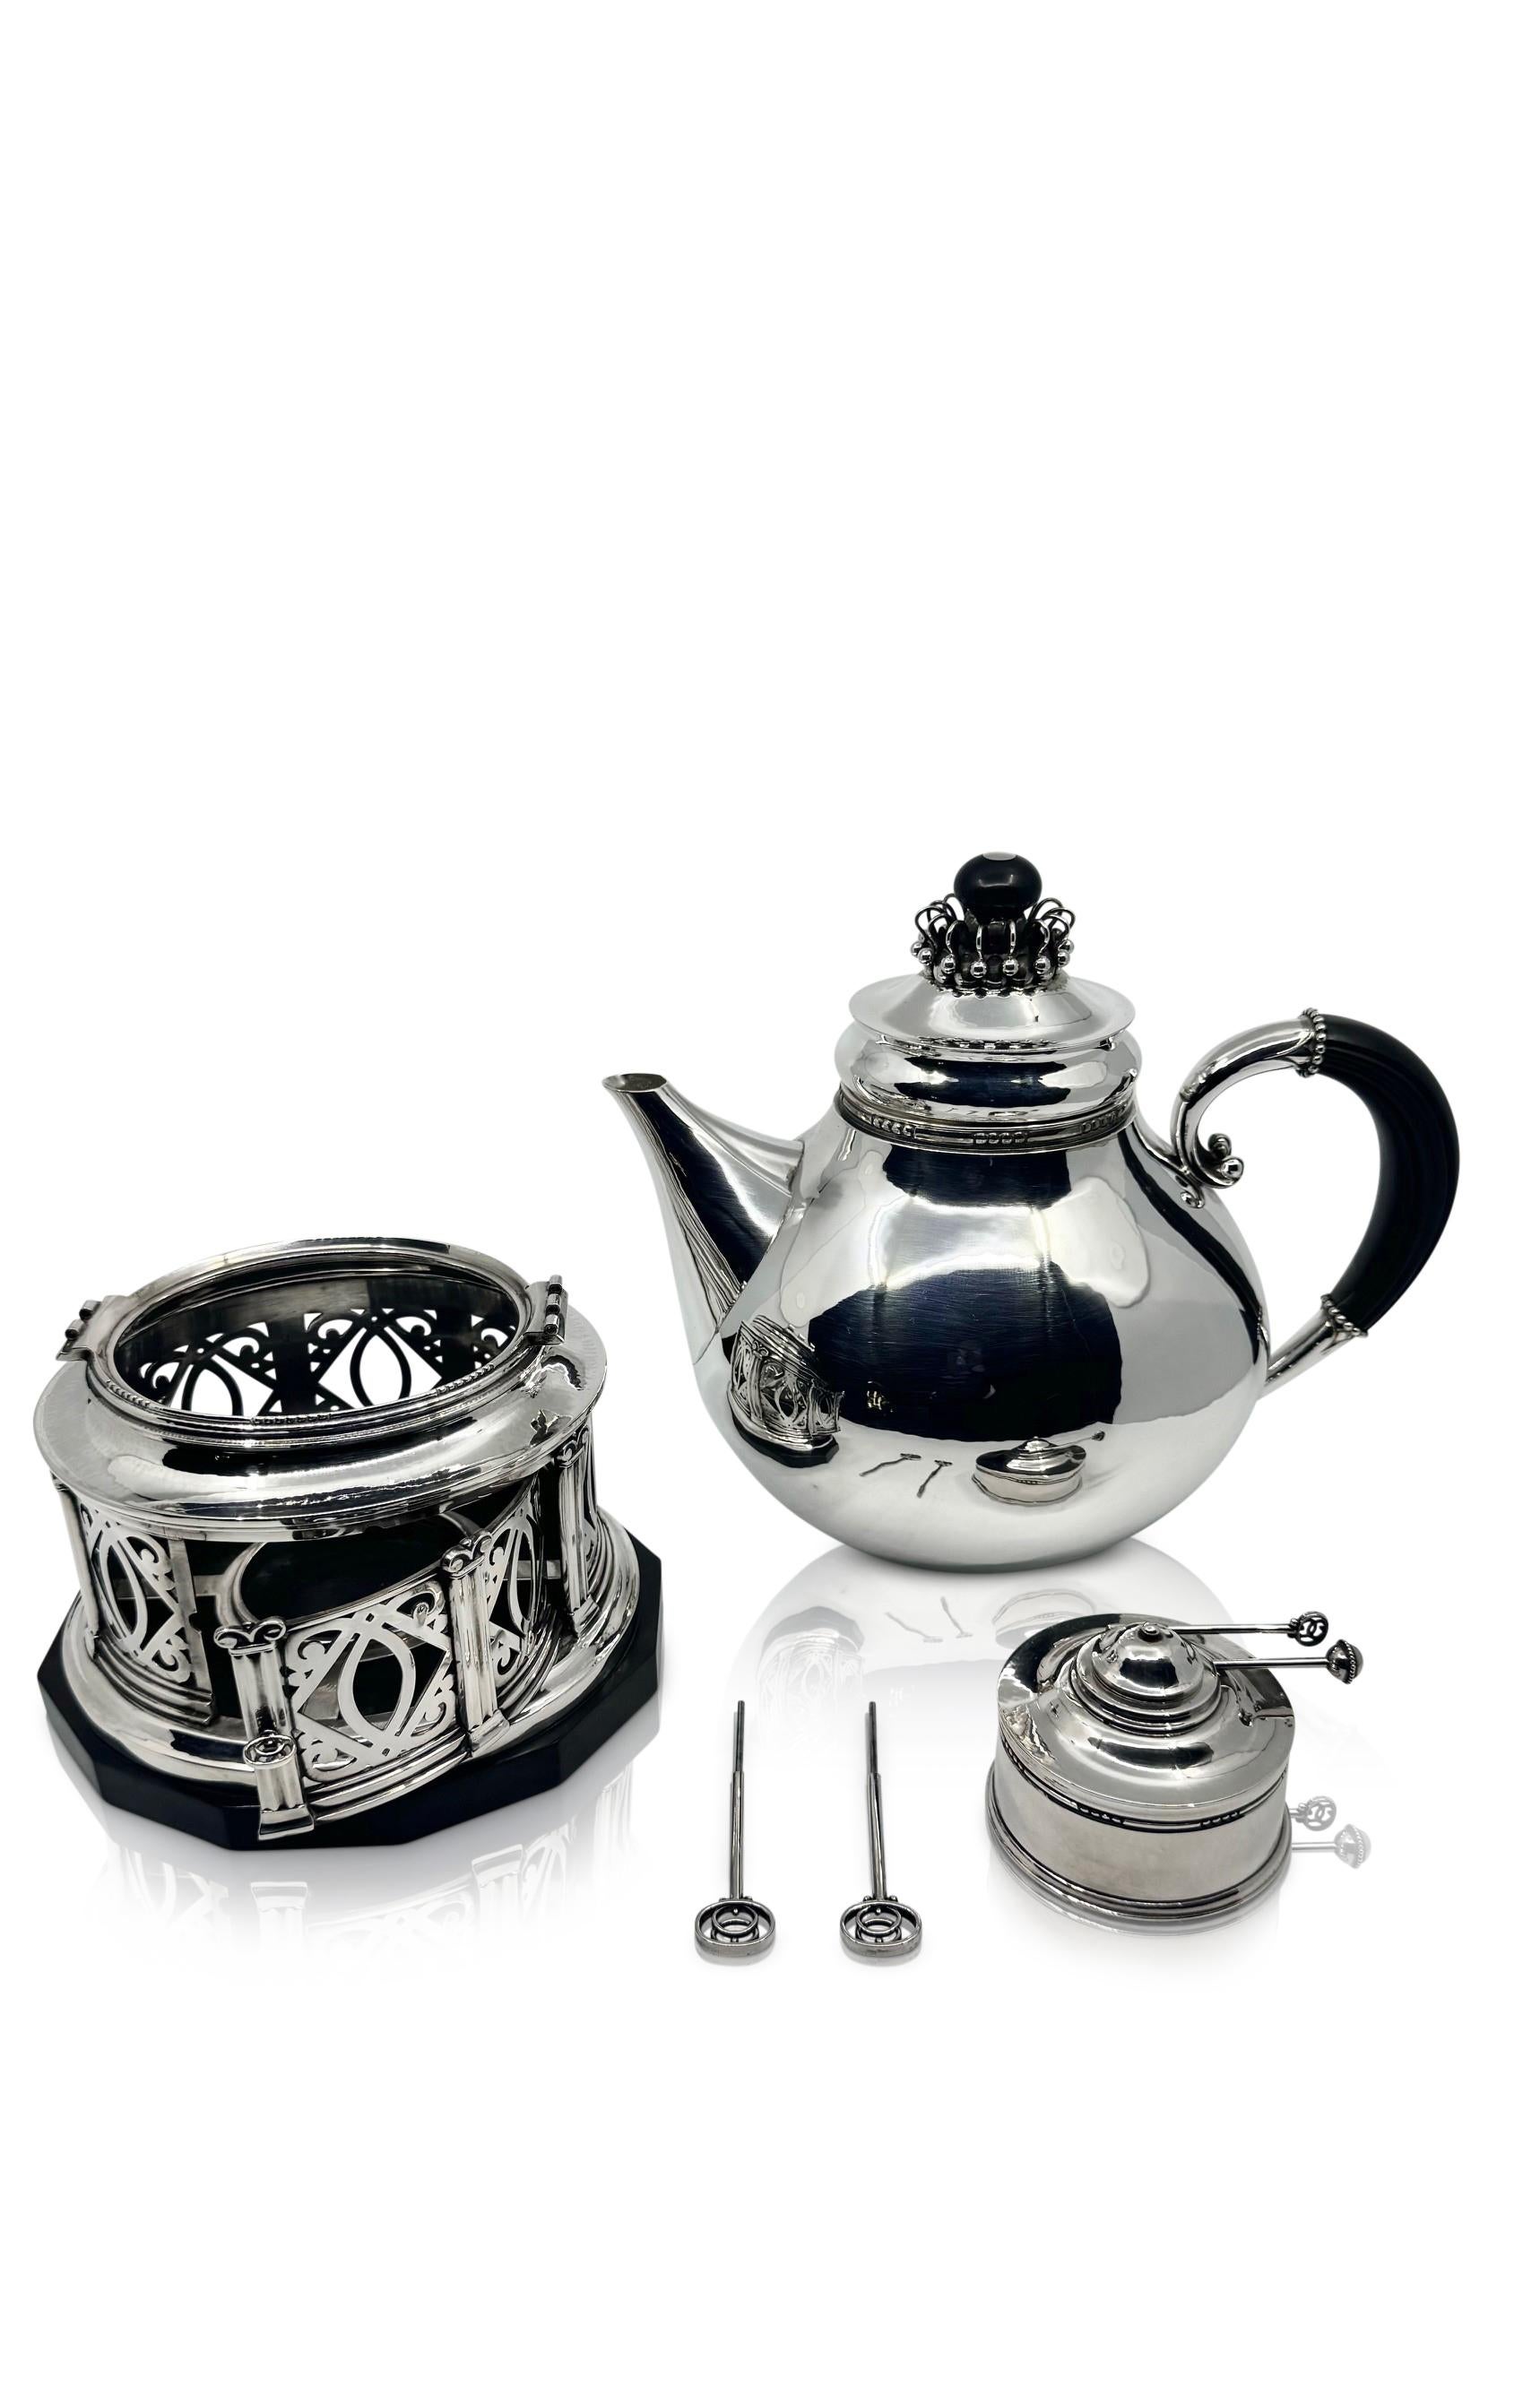 A significant creation from Georg Jensen, this sterling silver hot water kettle or tea machine, bears the distinctive design #251 by Johan Rohde dating back to 1920. The sizable oval vessel features hand-hammered detailing on both the pot and spout.